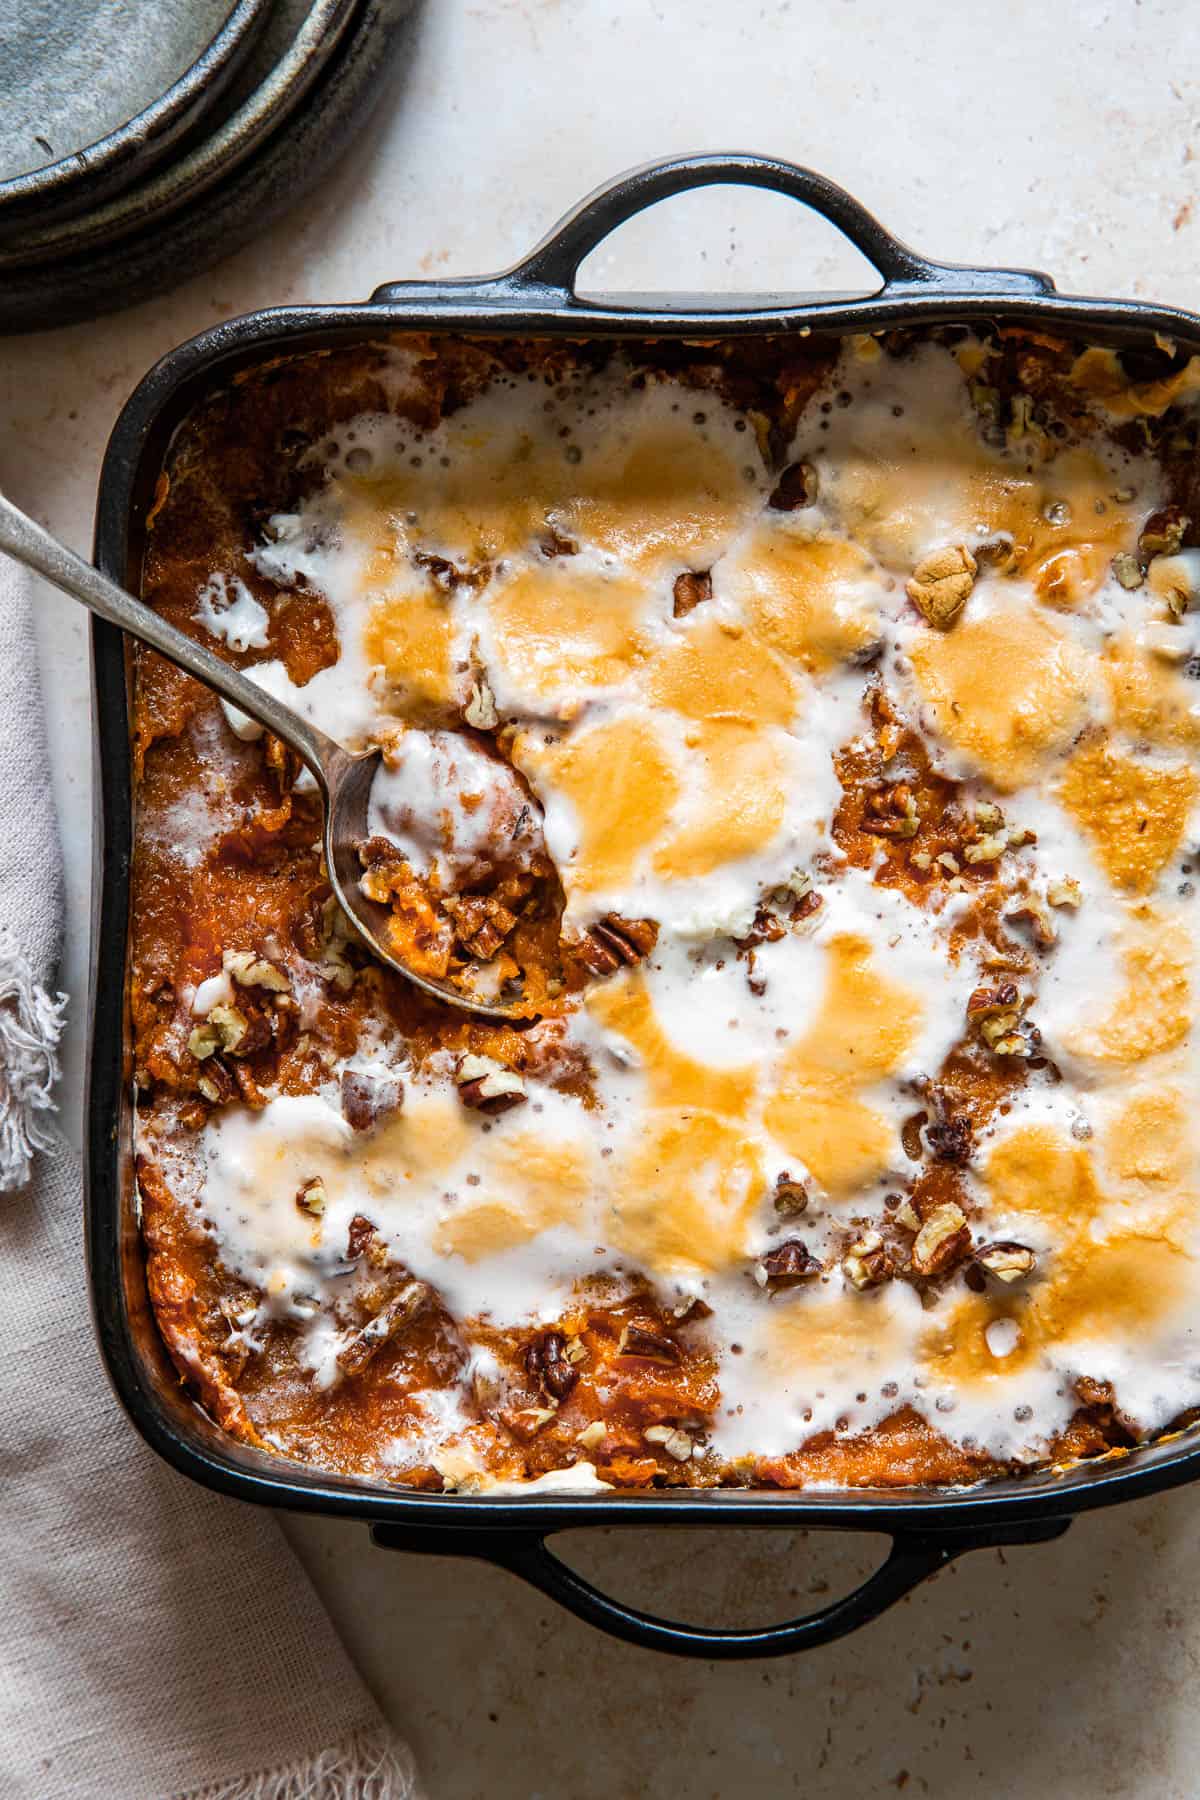 A serving spoon resting in a square black baking dish of sweet potato casserole.